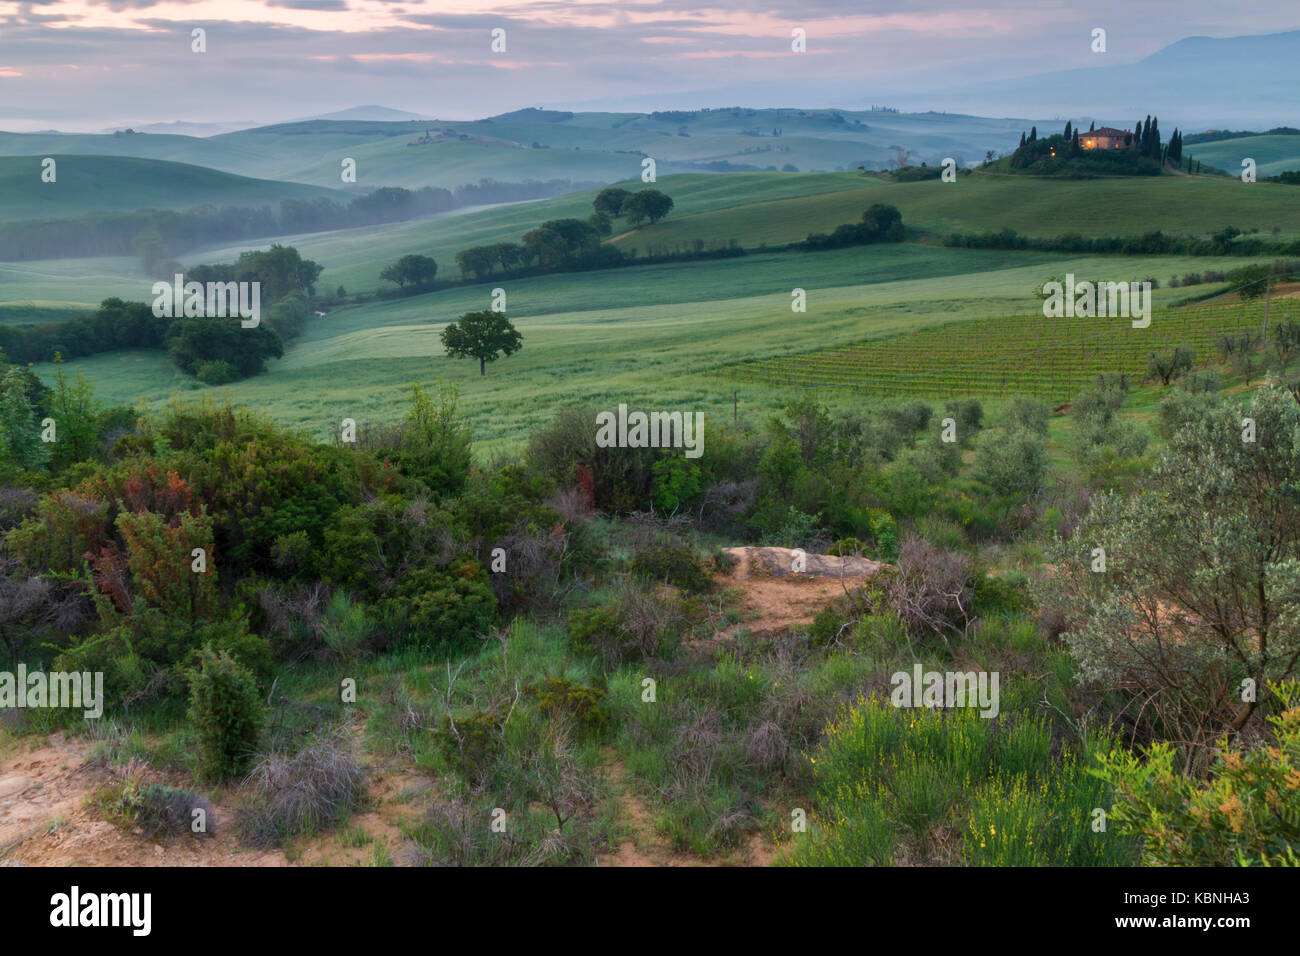 A spring sunrise at the Podere Belvedere, San Quirico d'Orcia, Val d'Orcia, Tuscany, Italy. Stock Photo